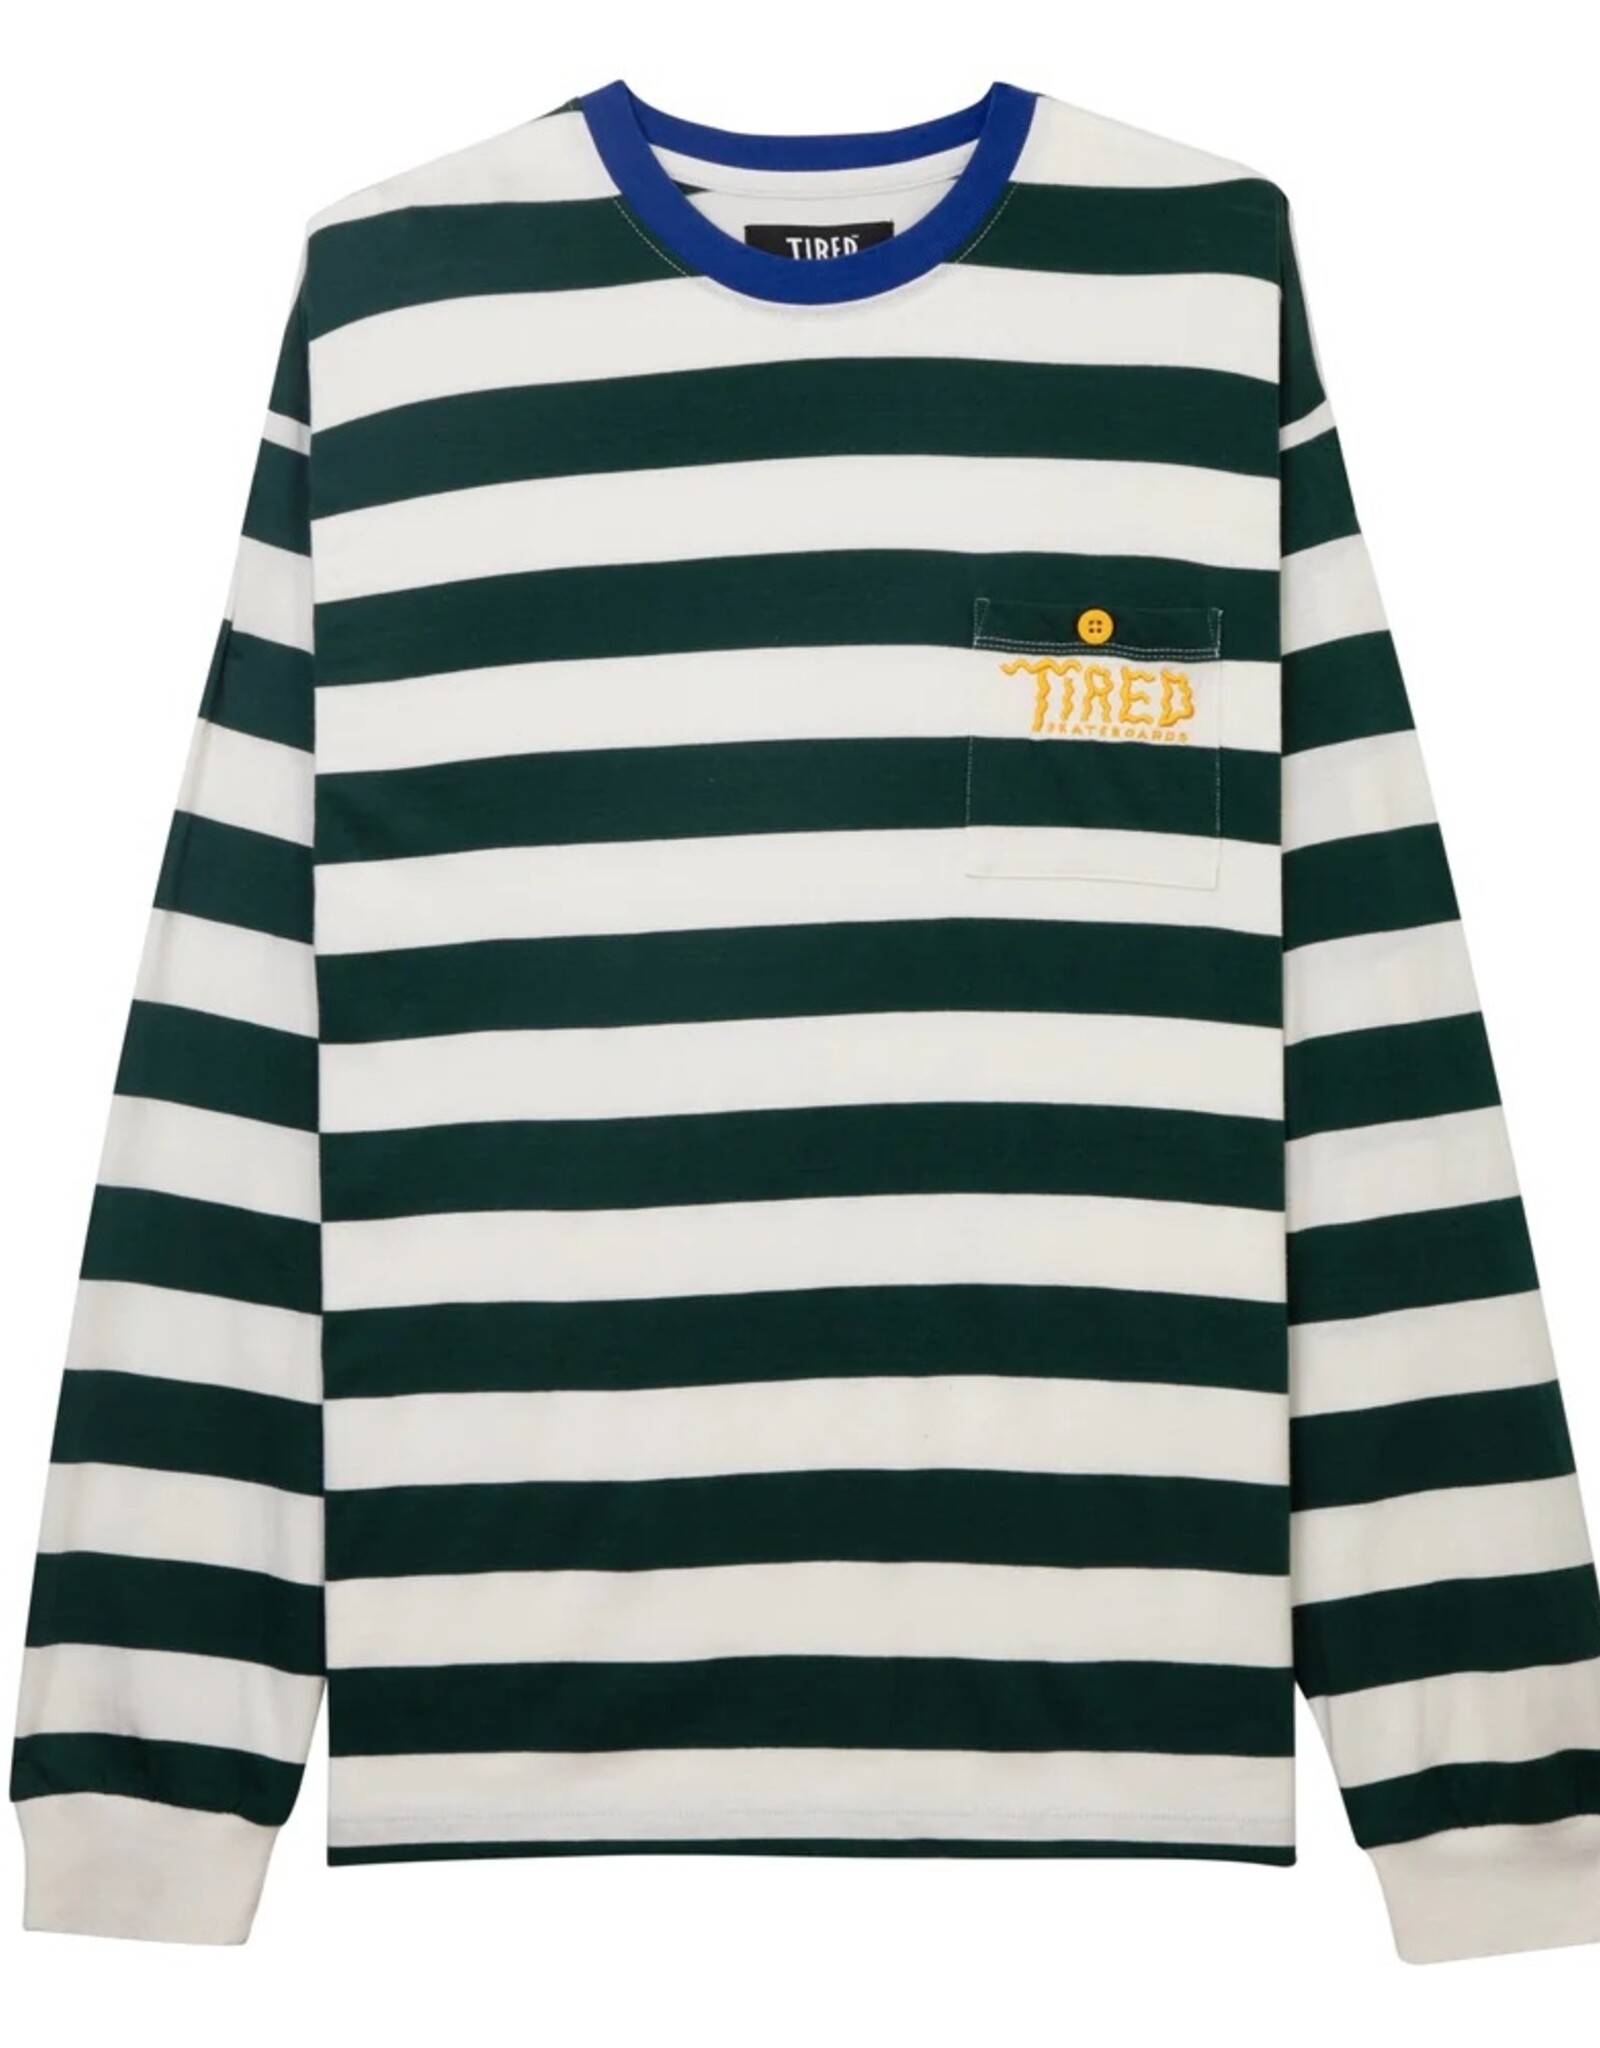 TIRED SKATEBOARDS TIRED SQUIGGLE LOGO STRIPED L/S - PURPLE/FOREST